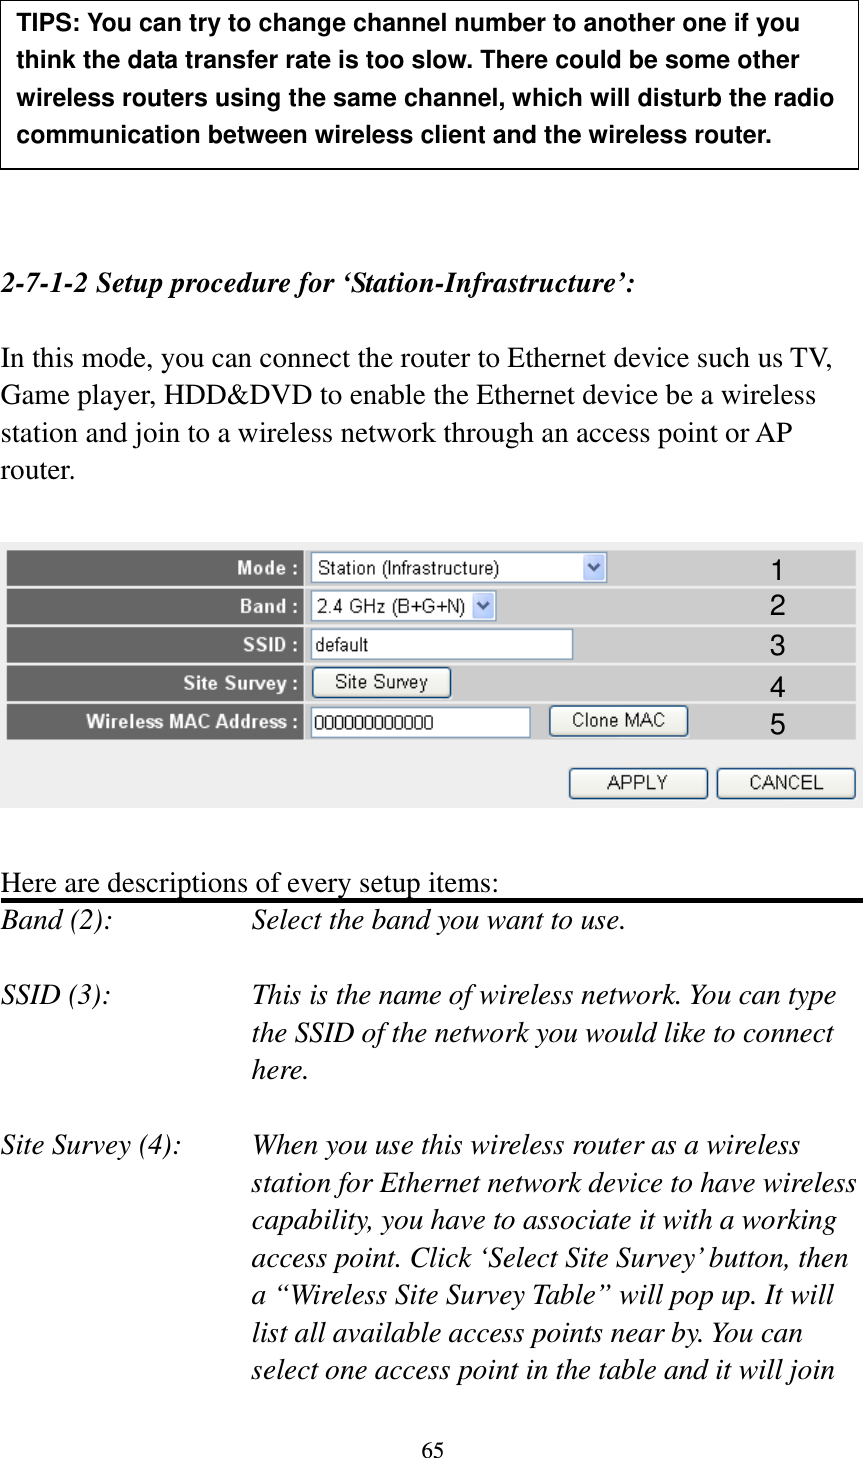 65         2-7-1-2 Setup procedure for ‘Station-Infrastructure’:  In this mode, you can connect the router to Ethernet device such us TV, Game player, HDD&amp;DVD to enable the Ethernet device be a wireless station and join to a wireless network through an access point or AP router.    Here are descriptions of every setup items: Band (2):  Select the band you want to use.  SSID (3):  This is the name of wireless network. You can type the SSID of the network you would like to connect here.  Site Survey (4):  When you use this wireless router as a wireless station for Ethernet network device to have wireless capability, you have to associate it with a working access point. Click ‘Select Site Survey’ button, then a “Wireless Site Survey Table” will pop up. It will list all available access points near by. You can select one access point in the table and it will join TIPS: You can try to change channel number to another one if you think the data transfer rate is too slow. There could be some other wireless routers using the same channel, which will disturb the radio communication between wireless client and the wireless router. 1 2 3 4 5 